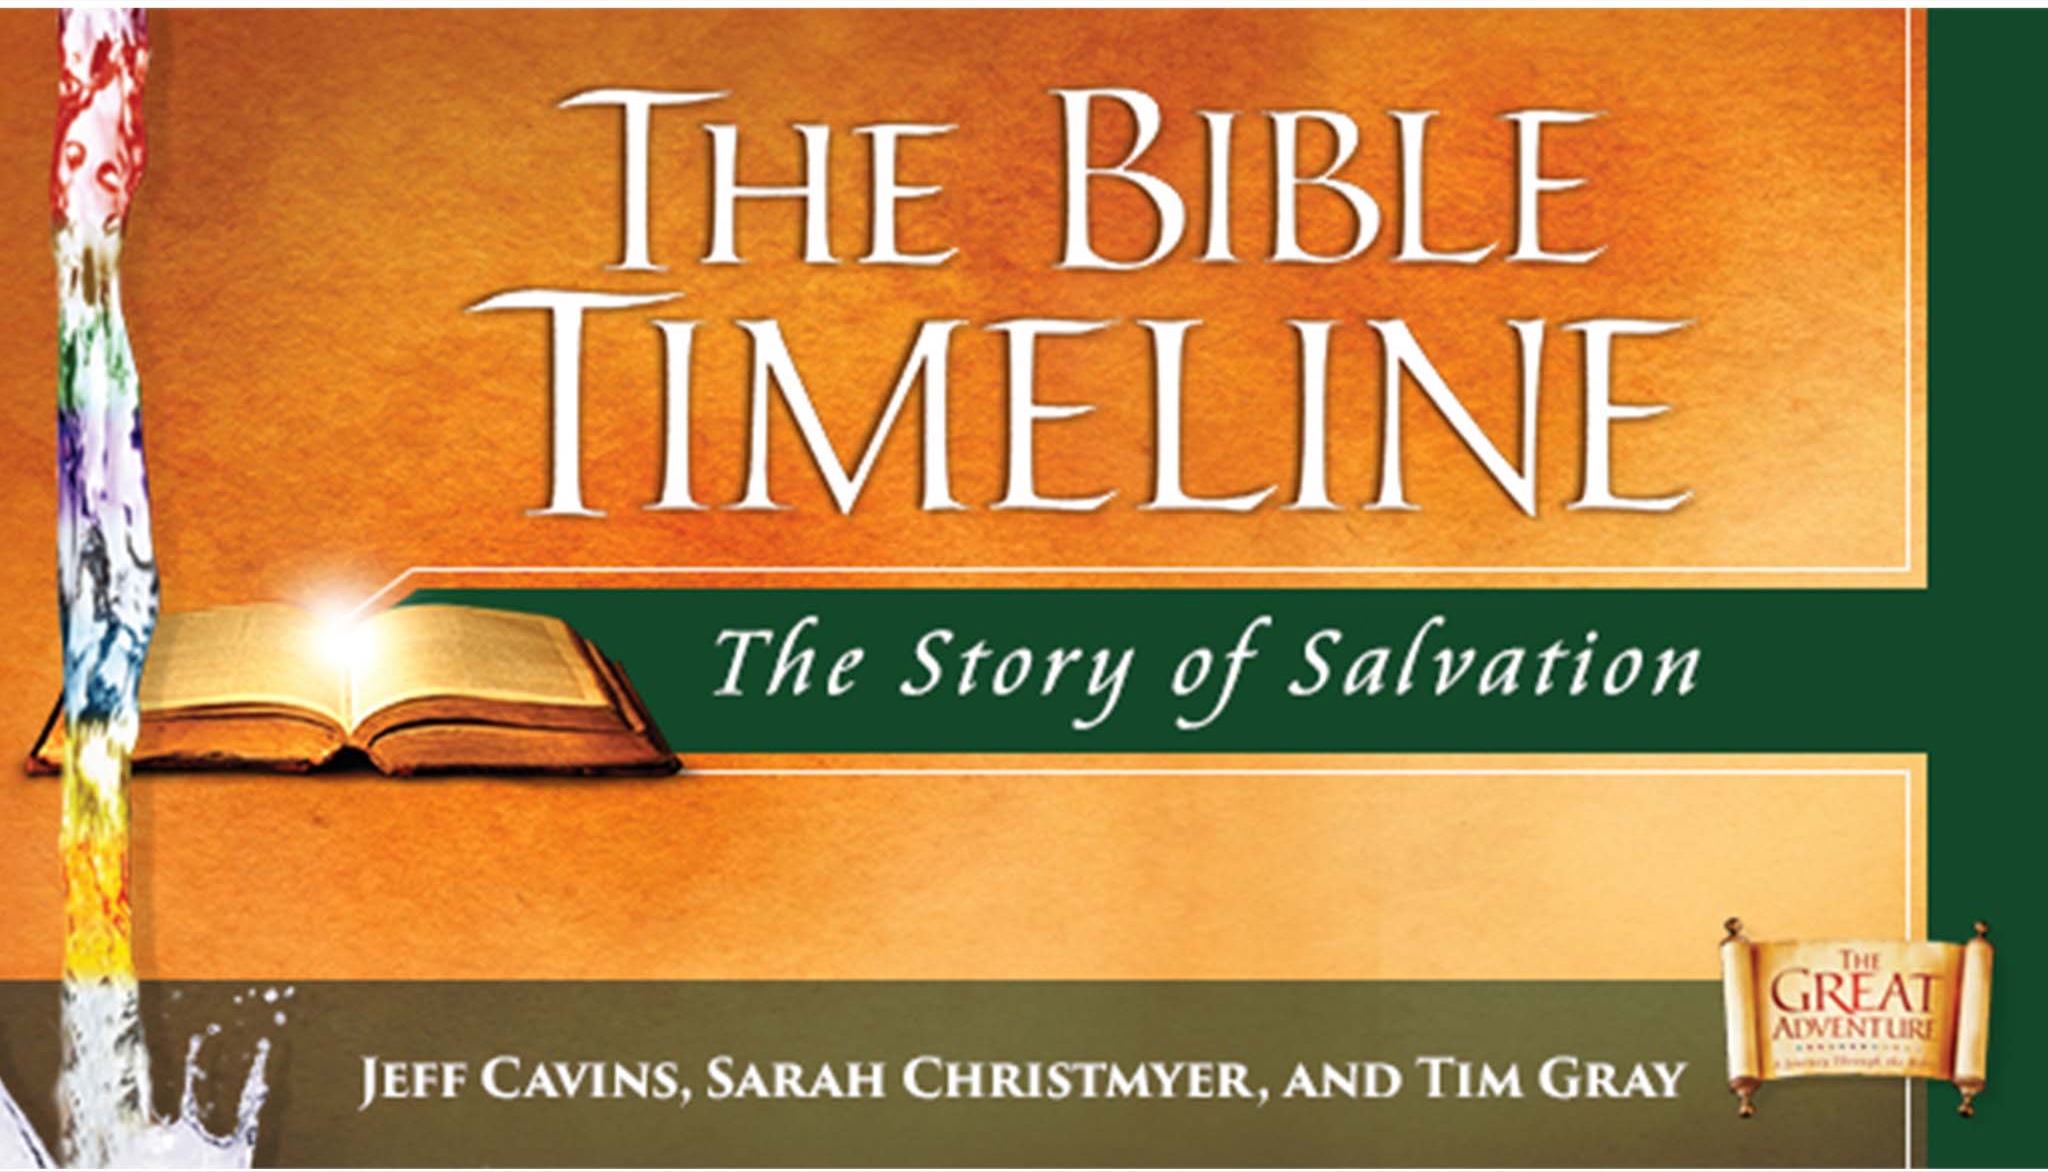 the-bible-timeline-the-story-of-salvation-morning-session-sacred